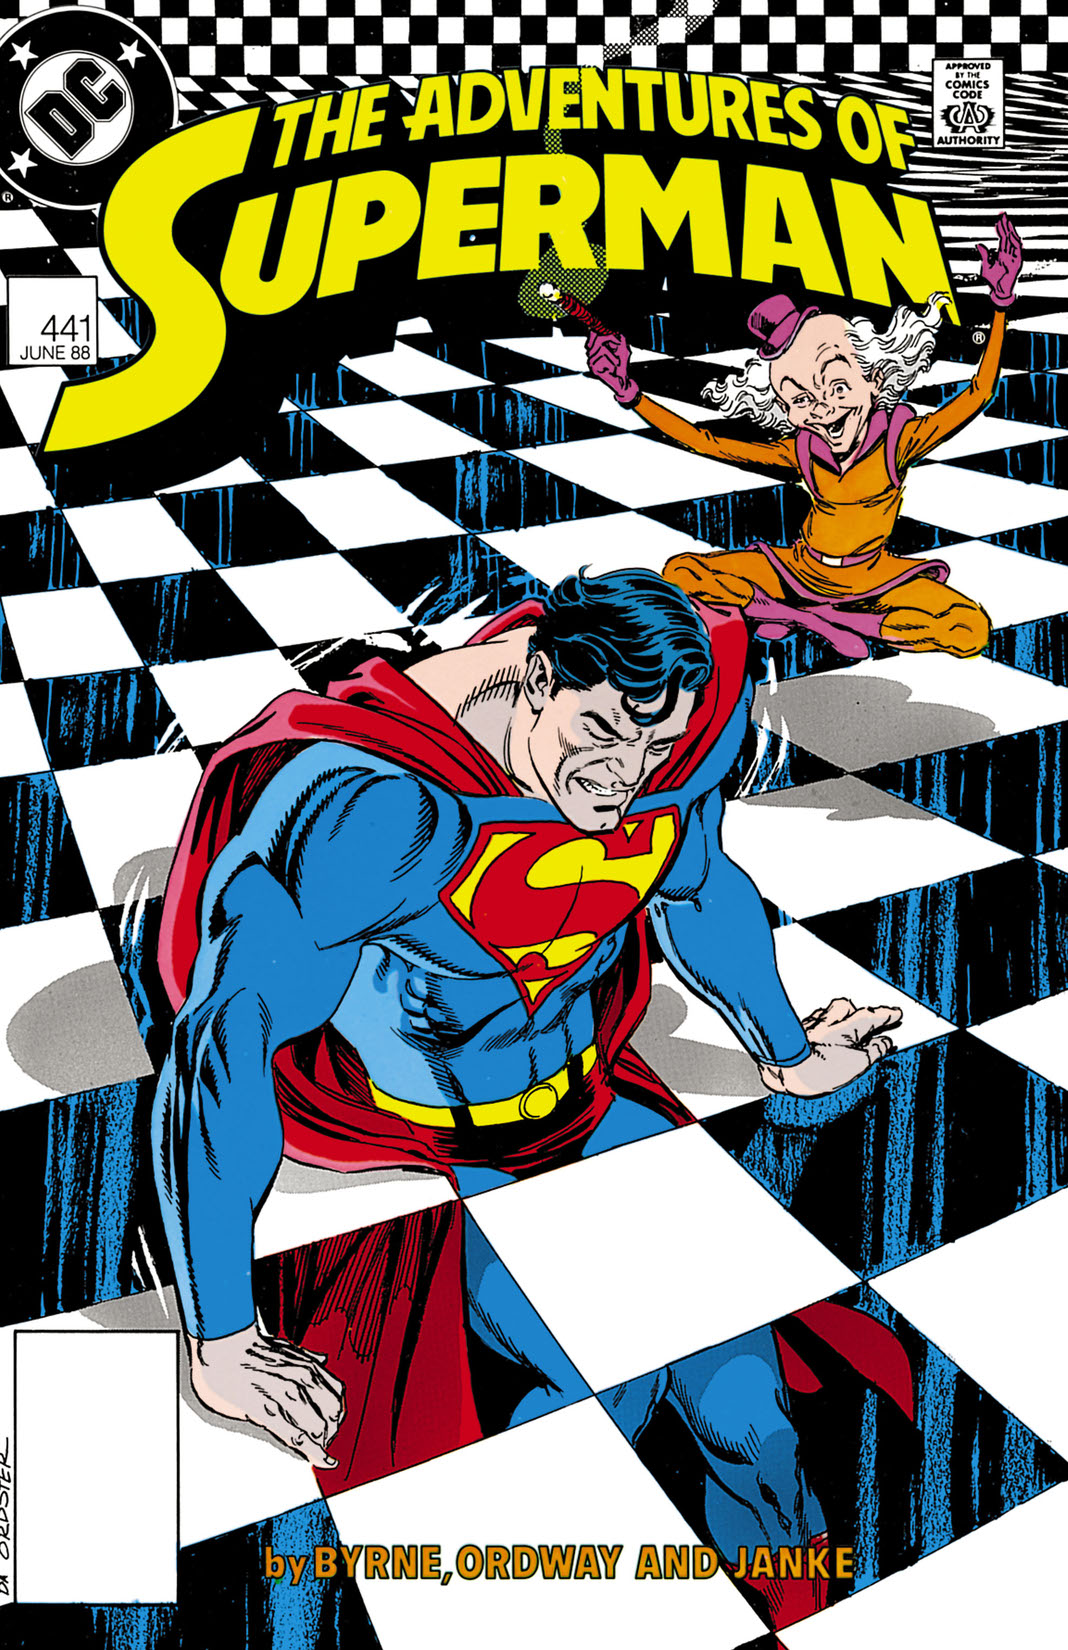 Adventures of Superman (1987-2006) #441 preview images